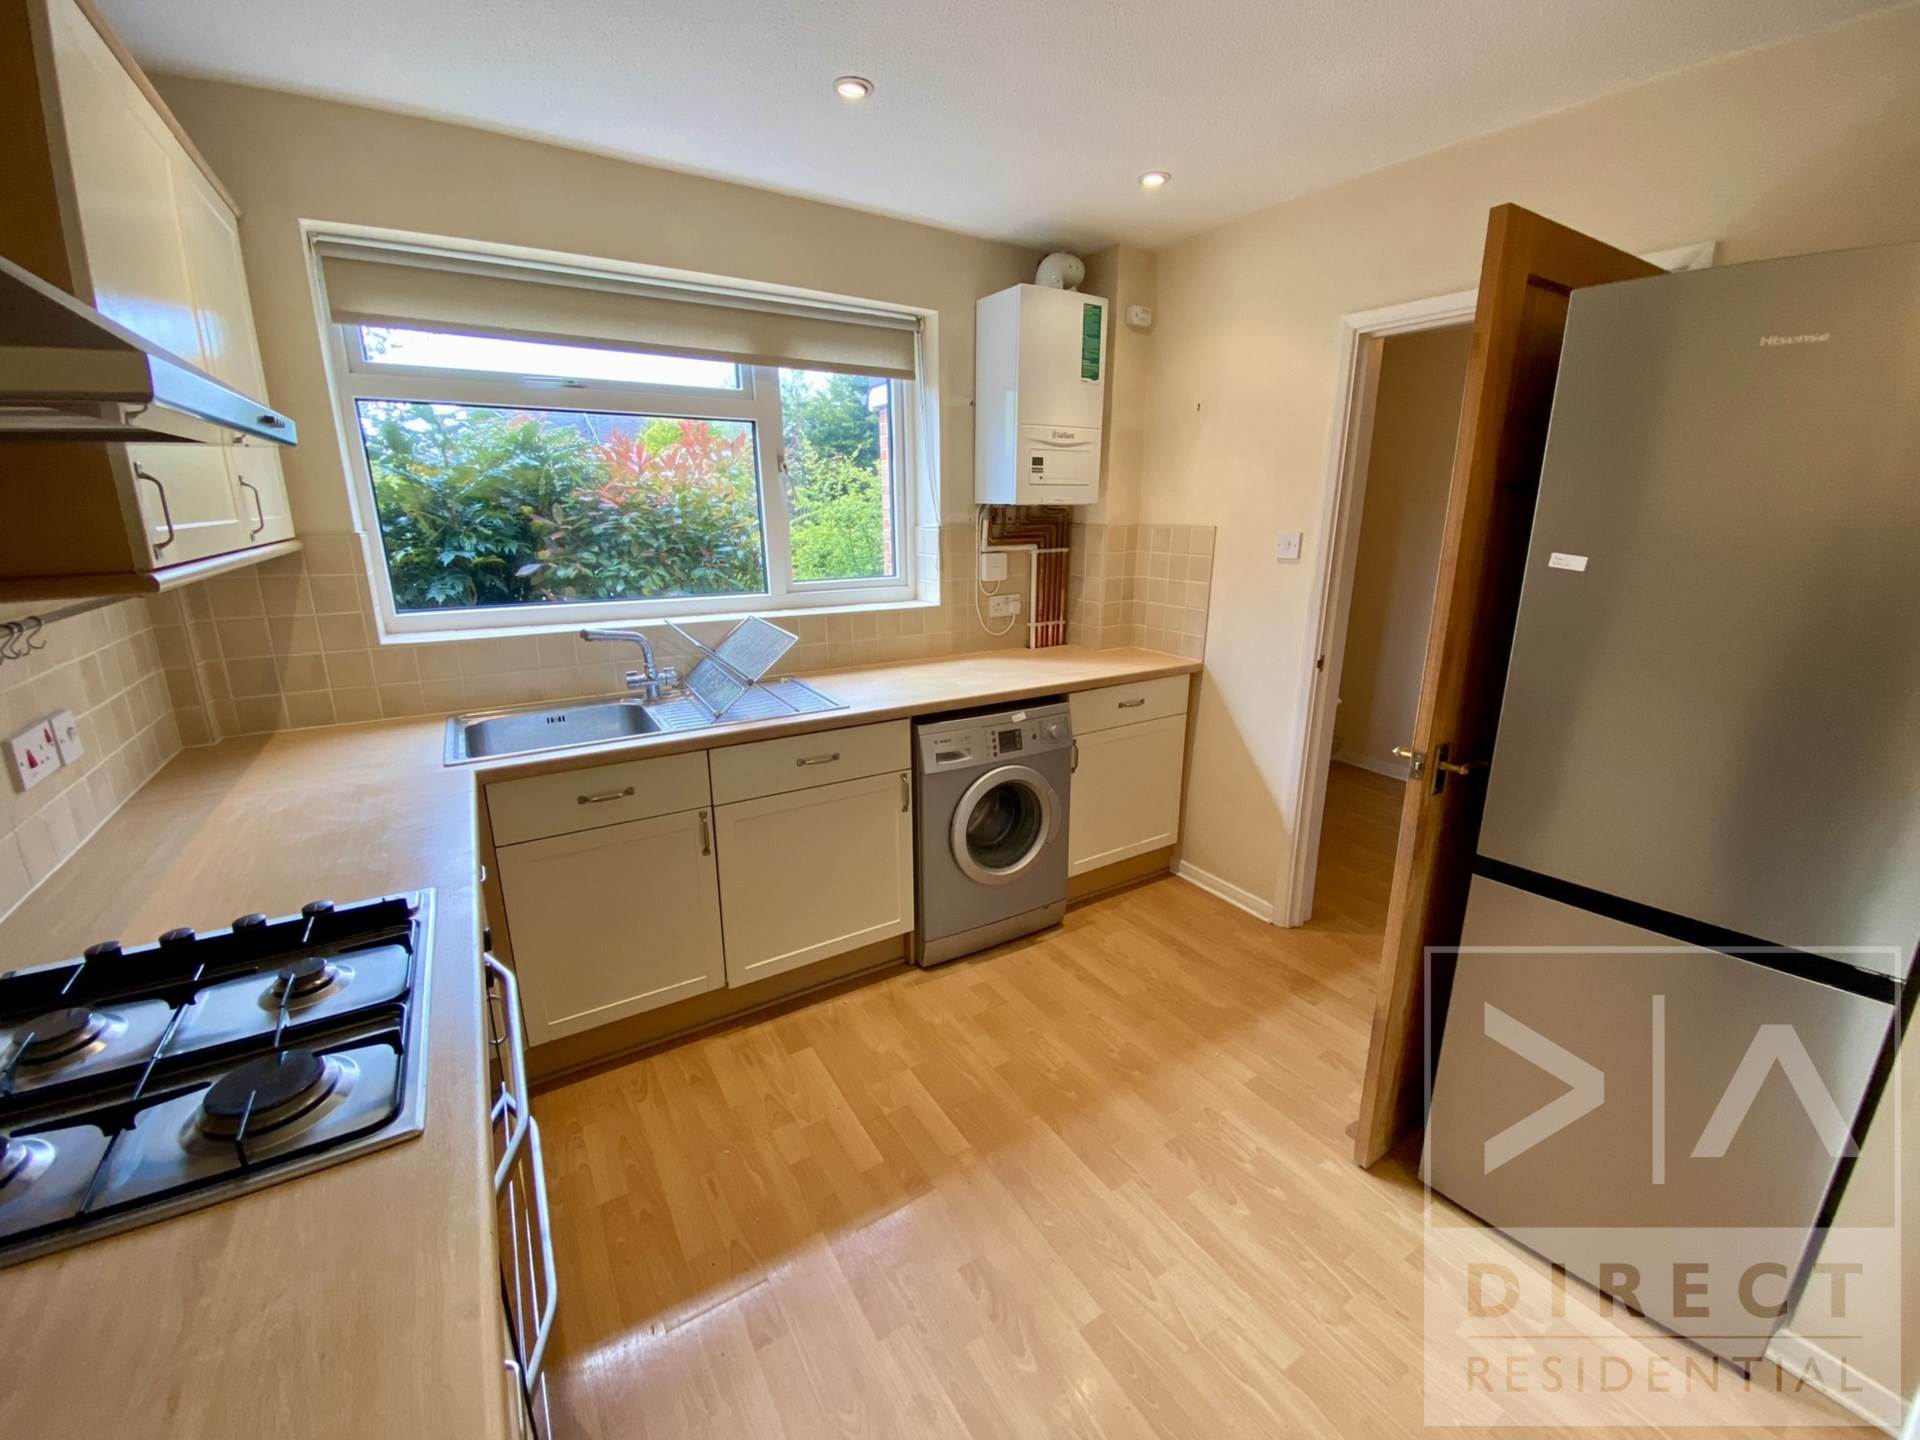 3 bed Mid Terraced House for rent in Langley Vale. From Direct Residential - Epsom